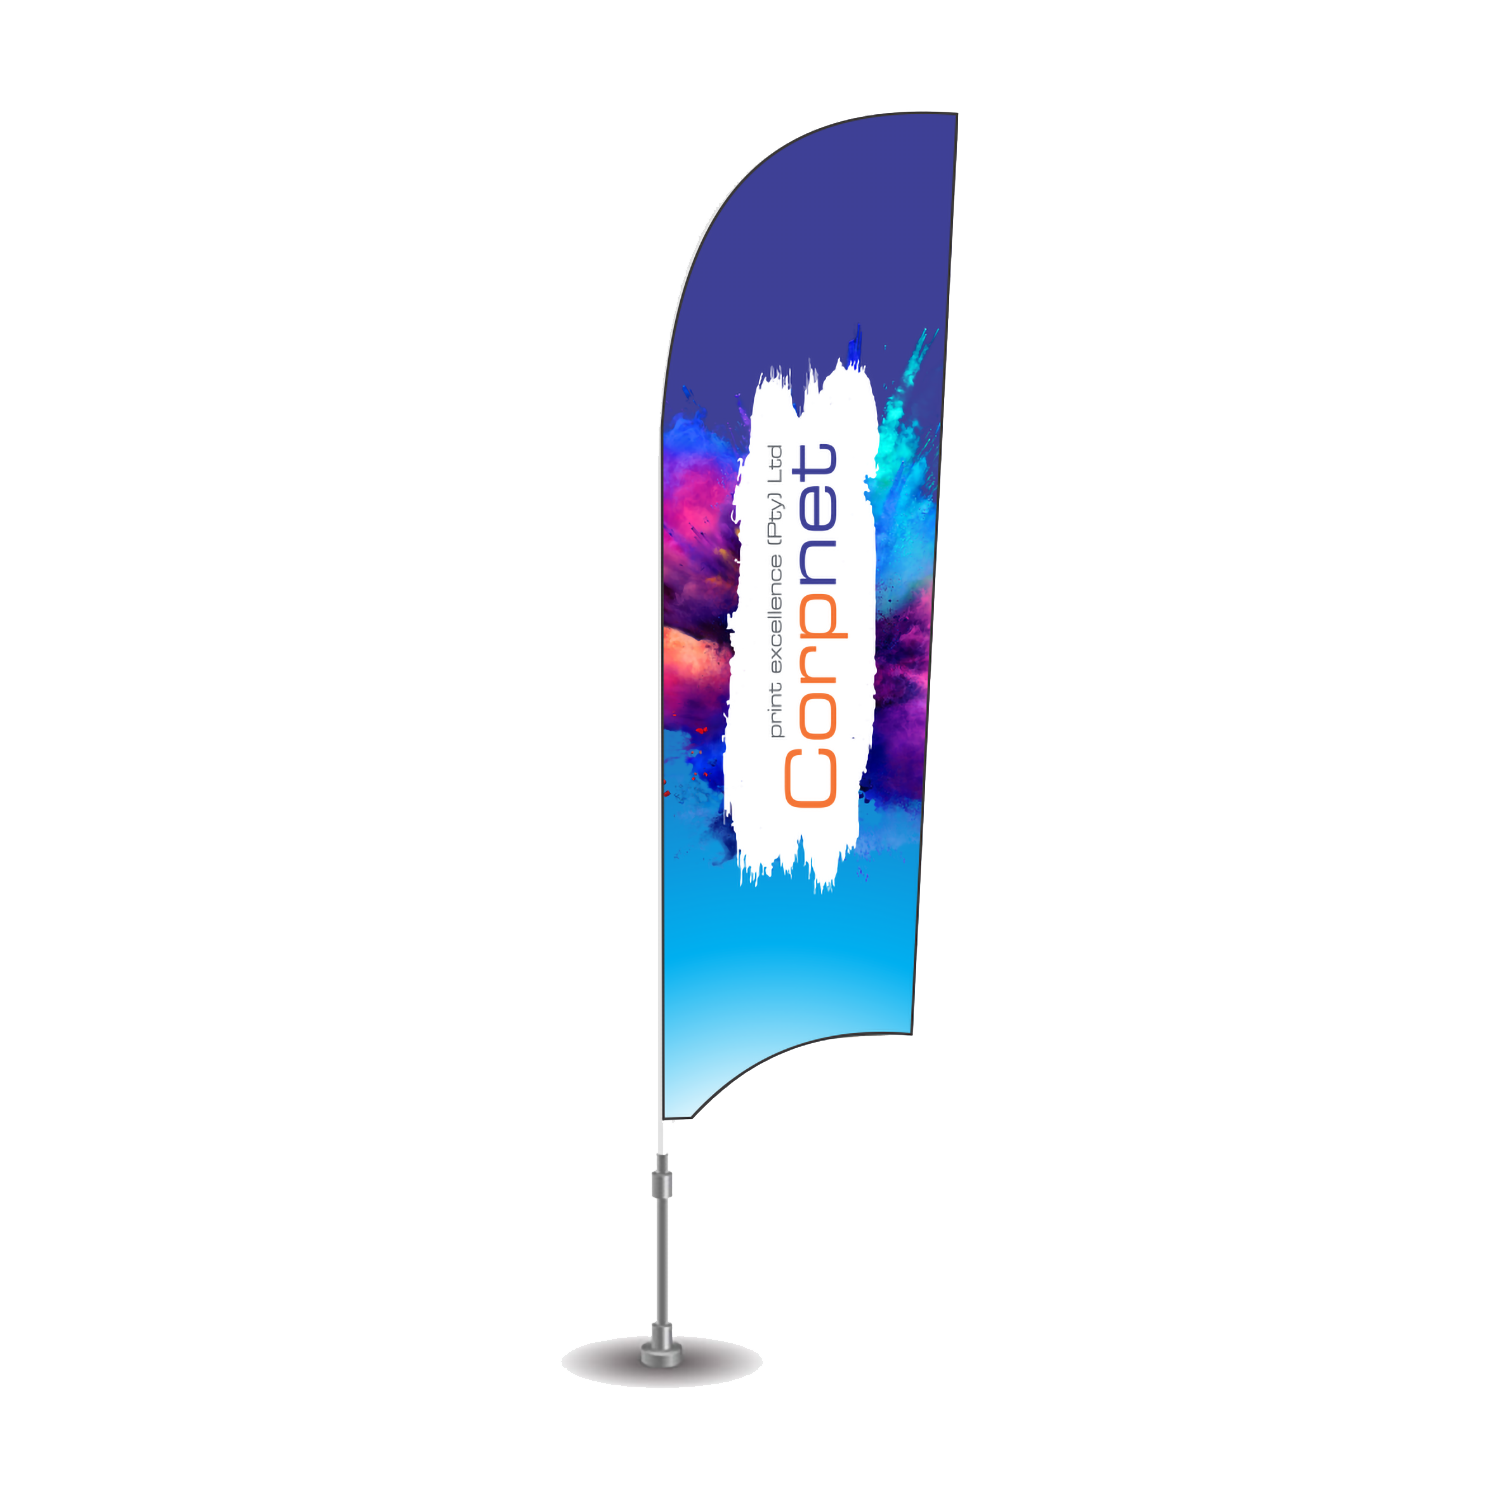 Arc Banner created by Corpnet Print Excellence